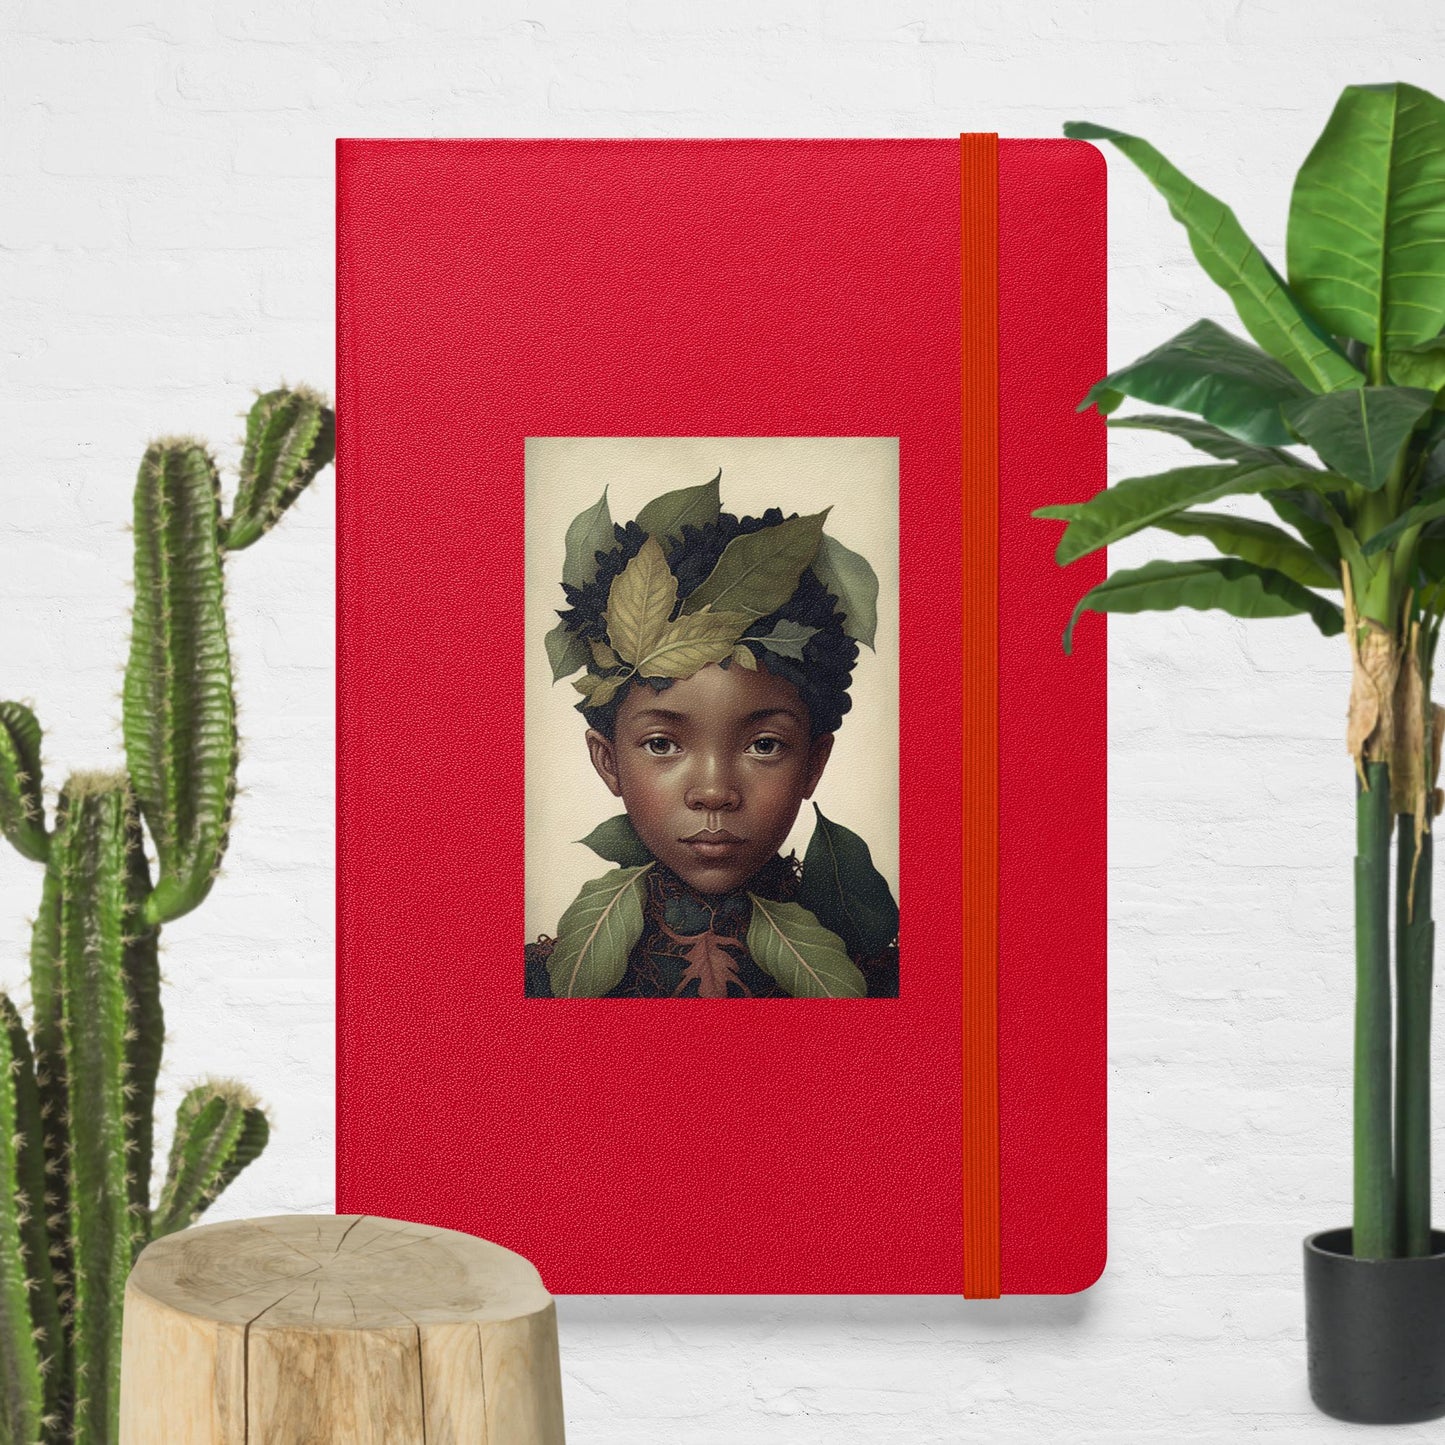 Hardcover bound notebook young boy